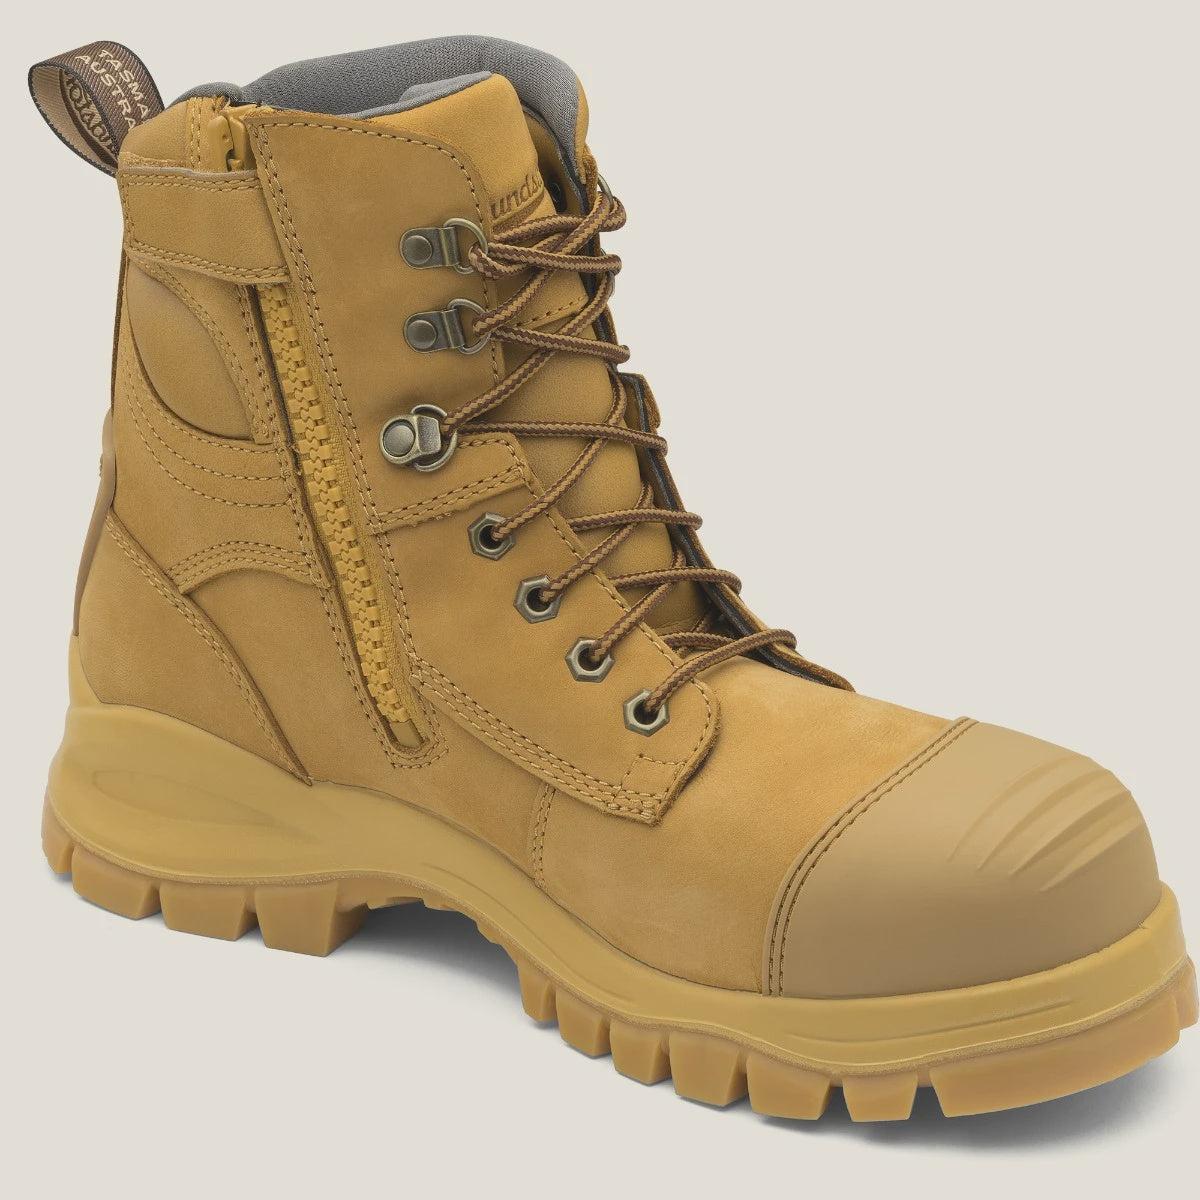 Blundstone - 992 Zip Up Safety Boot - Wheat